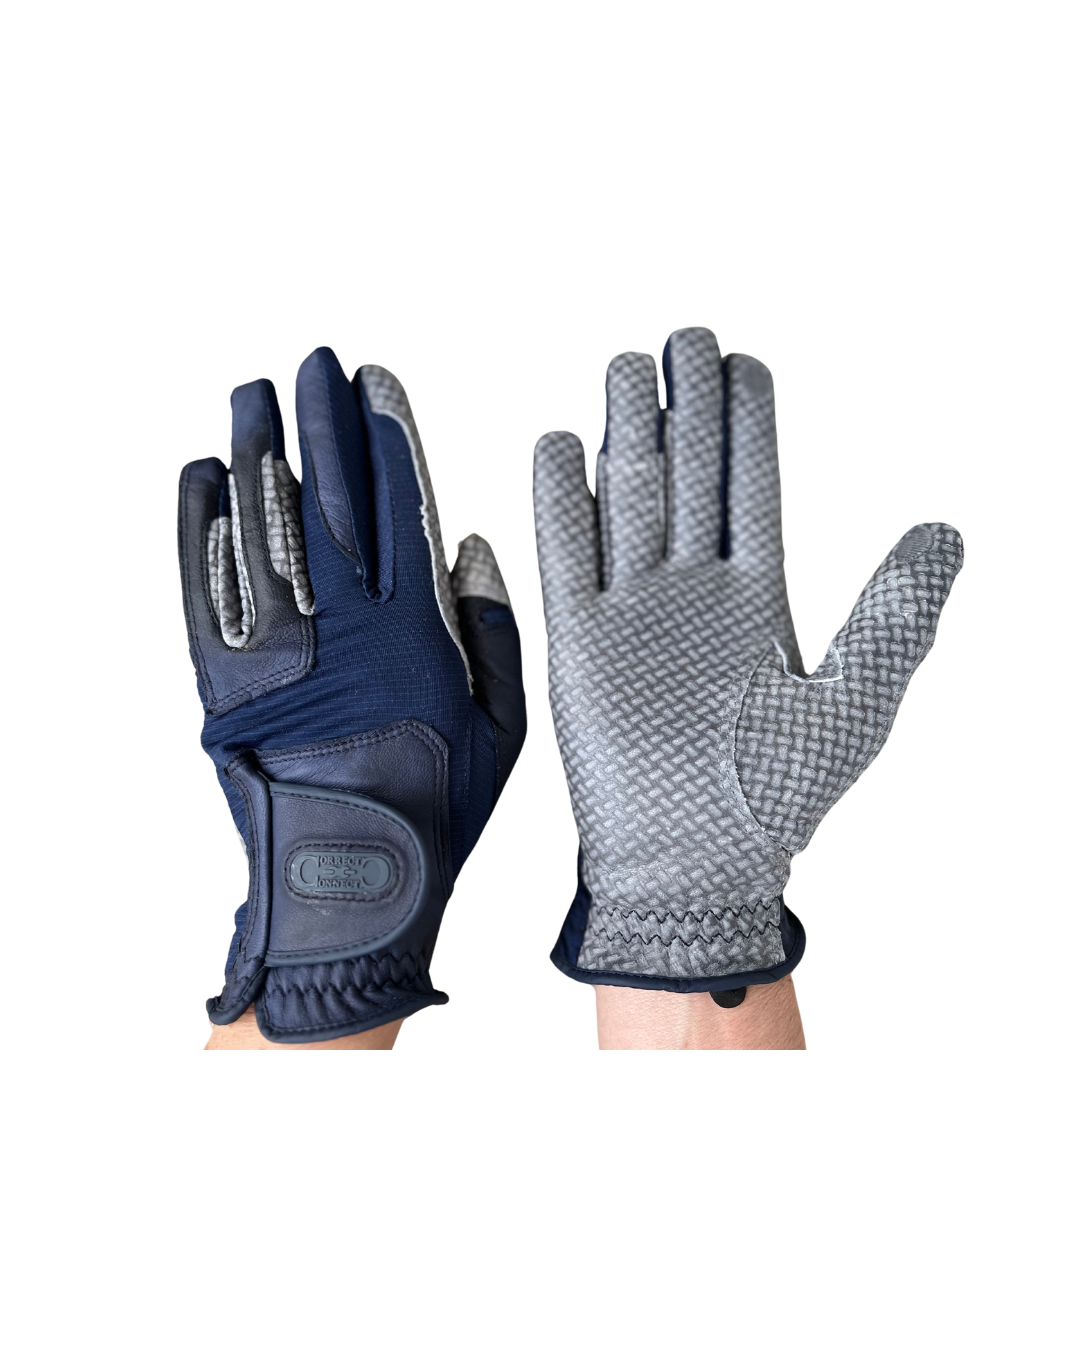 Oil-Tac Coppertech Leather Premium Riding Glove in Navy